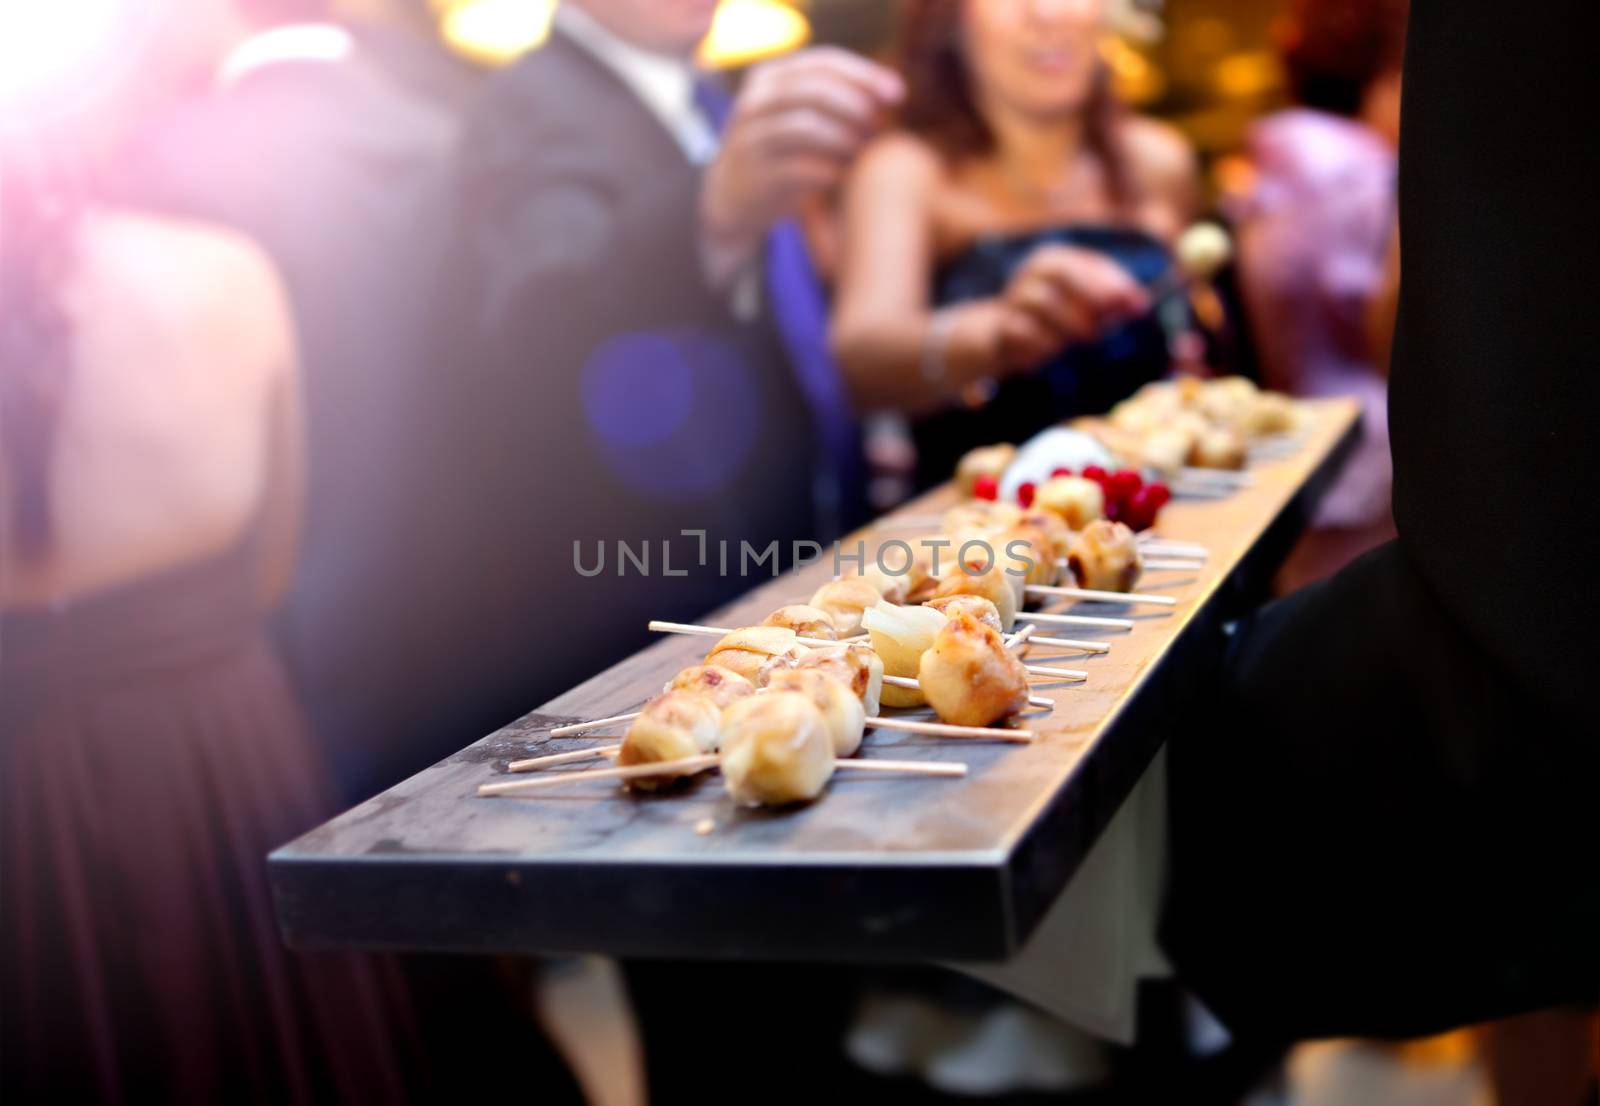 Catering service. Modern food or appetizer for events and celebrations.wedding